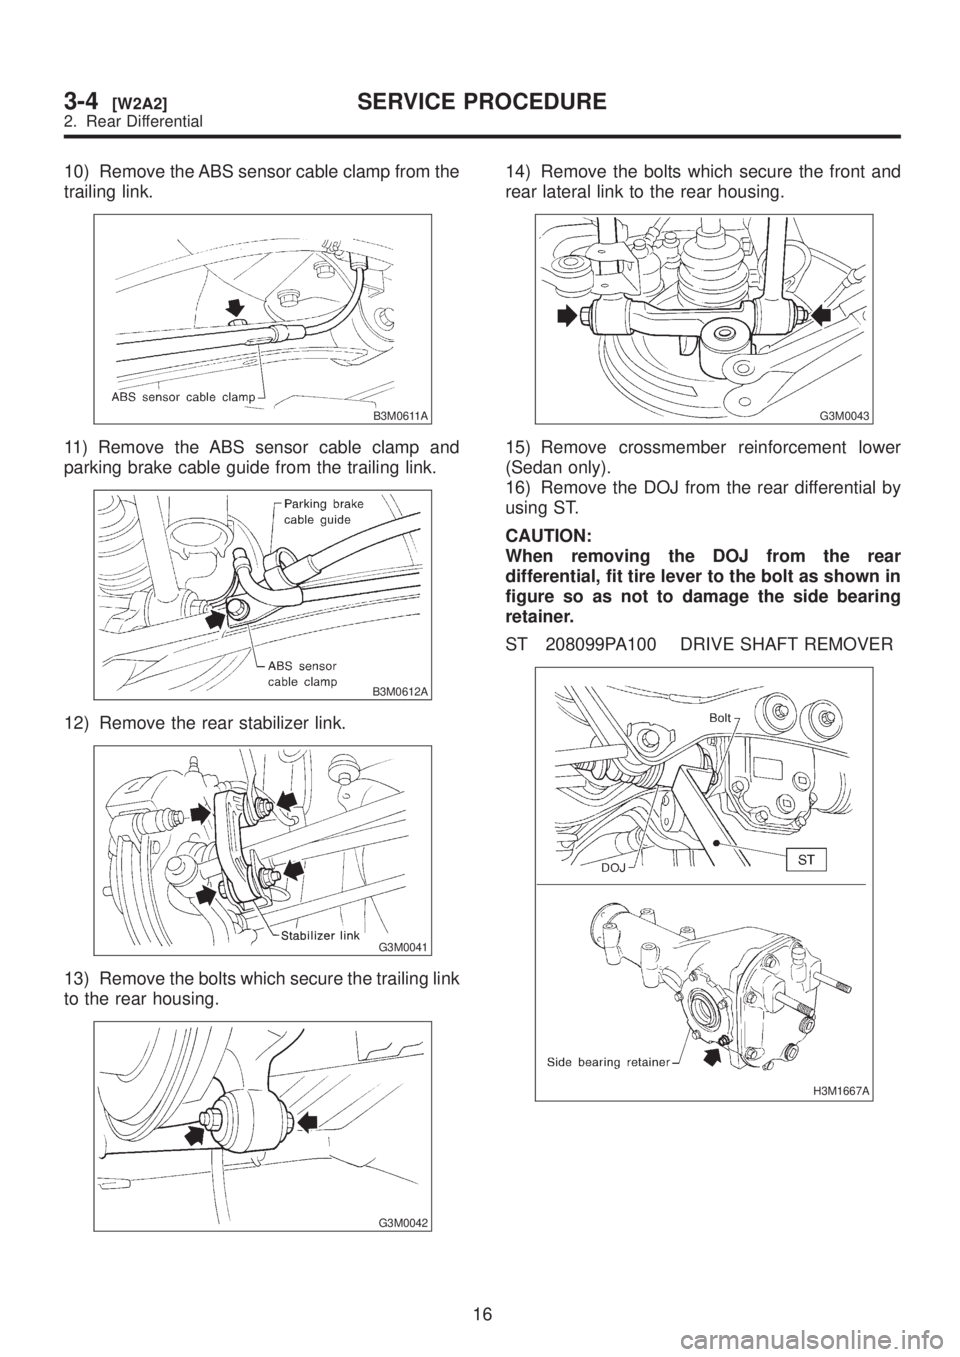 SUBARU LEGACY 1999  Service Repair Manual 10) Remove the ABS sensor cable clamp from the
trailing link.
B3M0611A
11) Remove the ABS sensor cable clamp and
parking brake cable guide from the trailing link.
B3M0612A
12) Remove the rear stabiliz